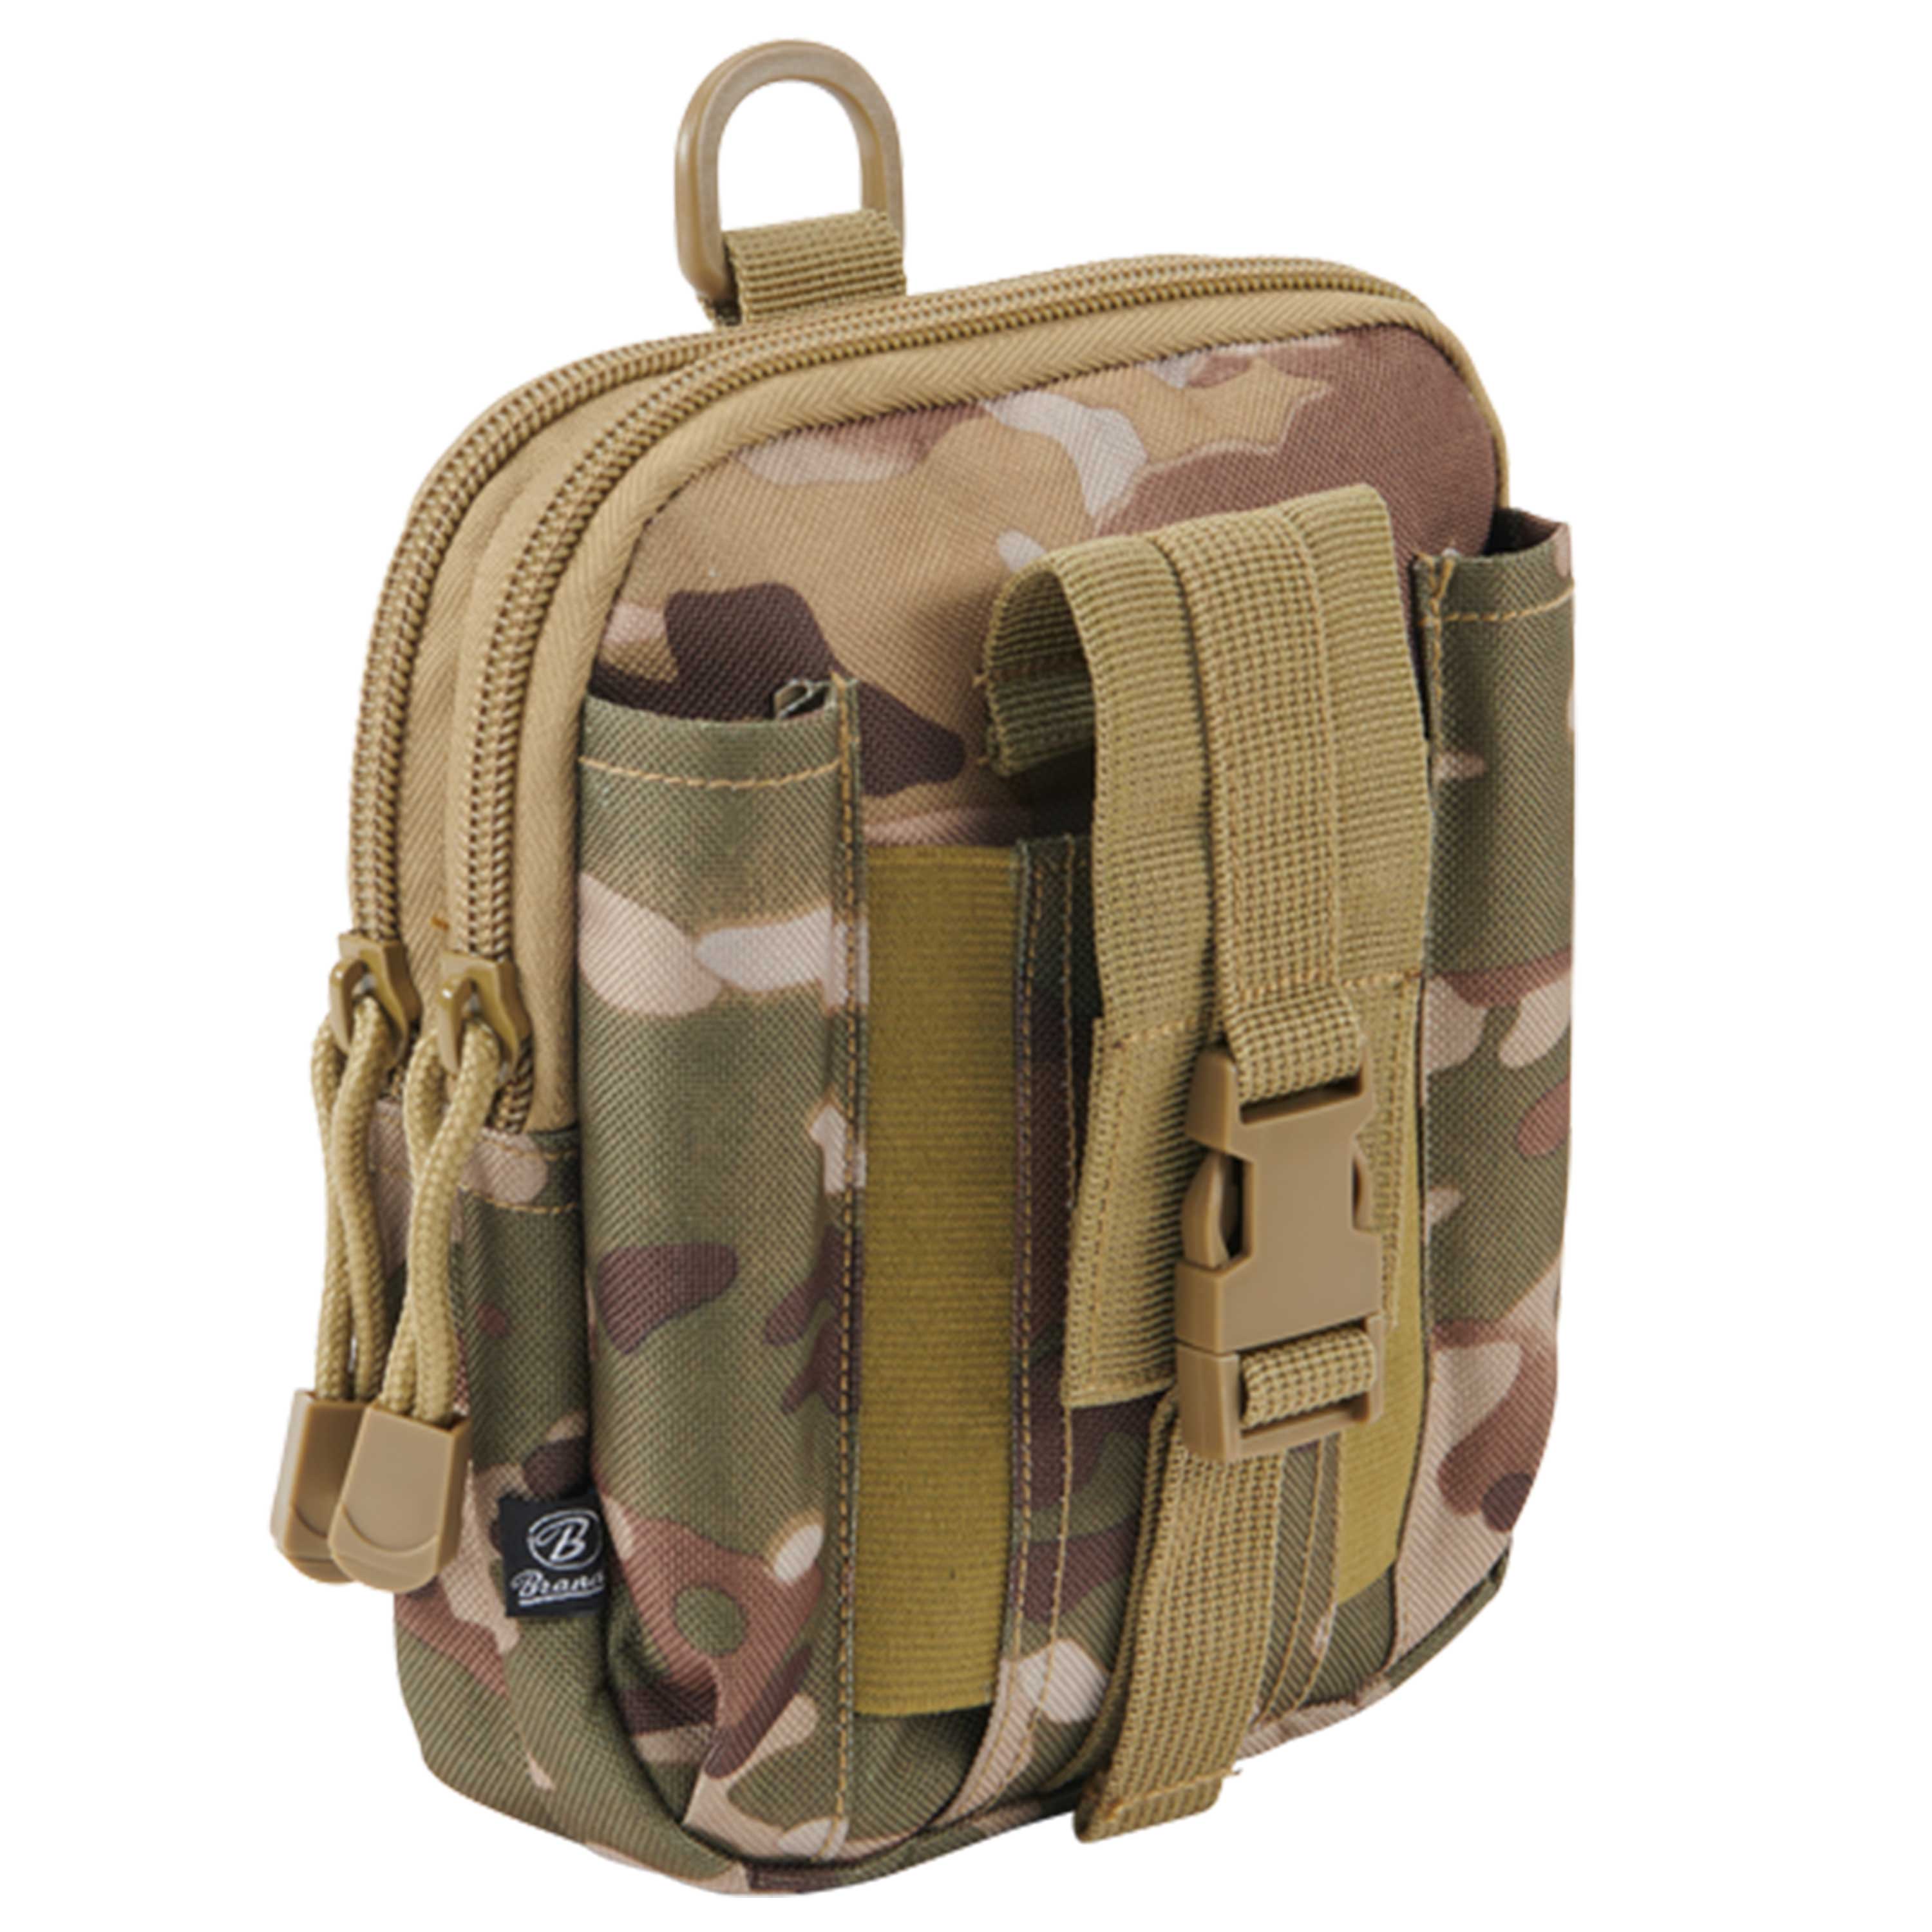 Purchase the Brandit Molle Pouch Functional tactical camo by ASM